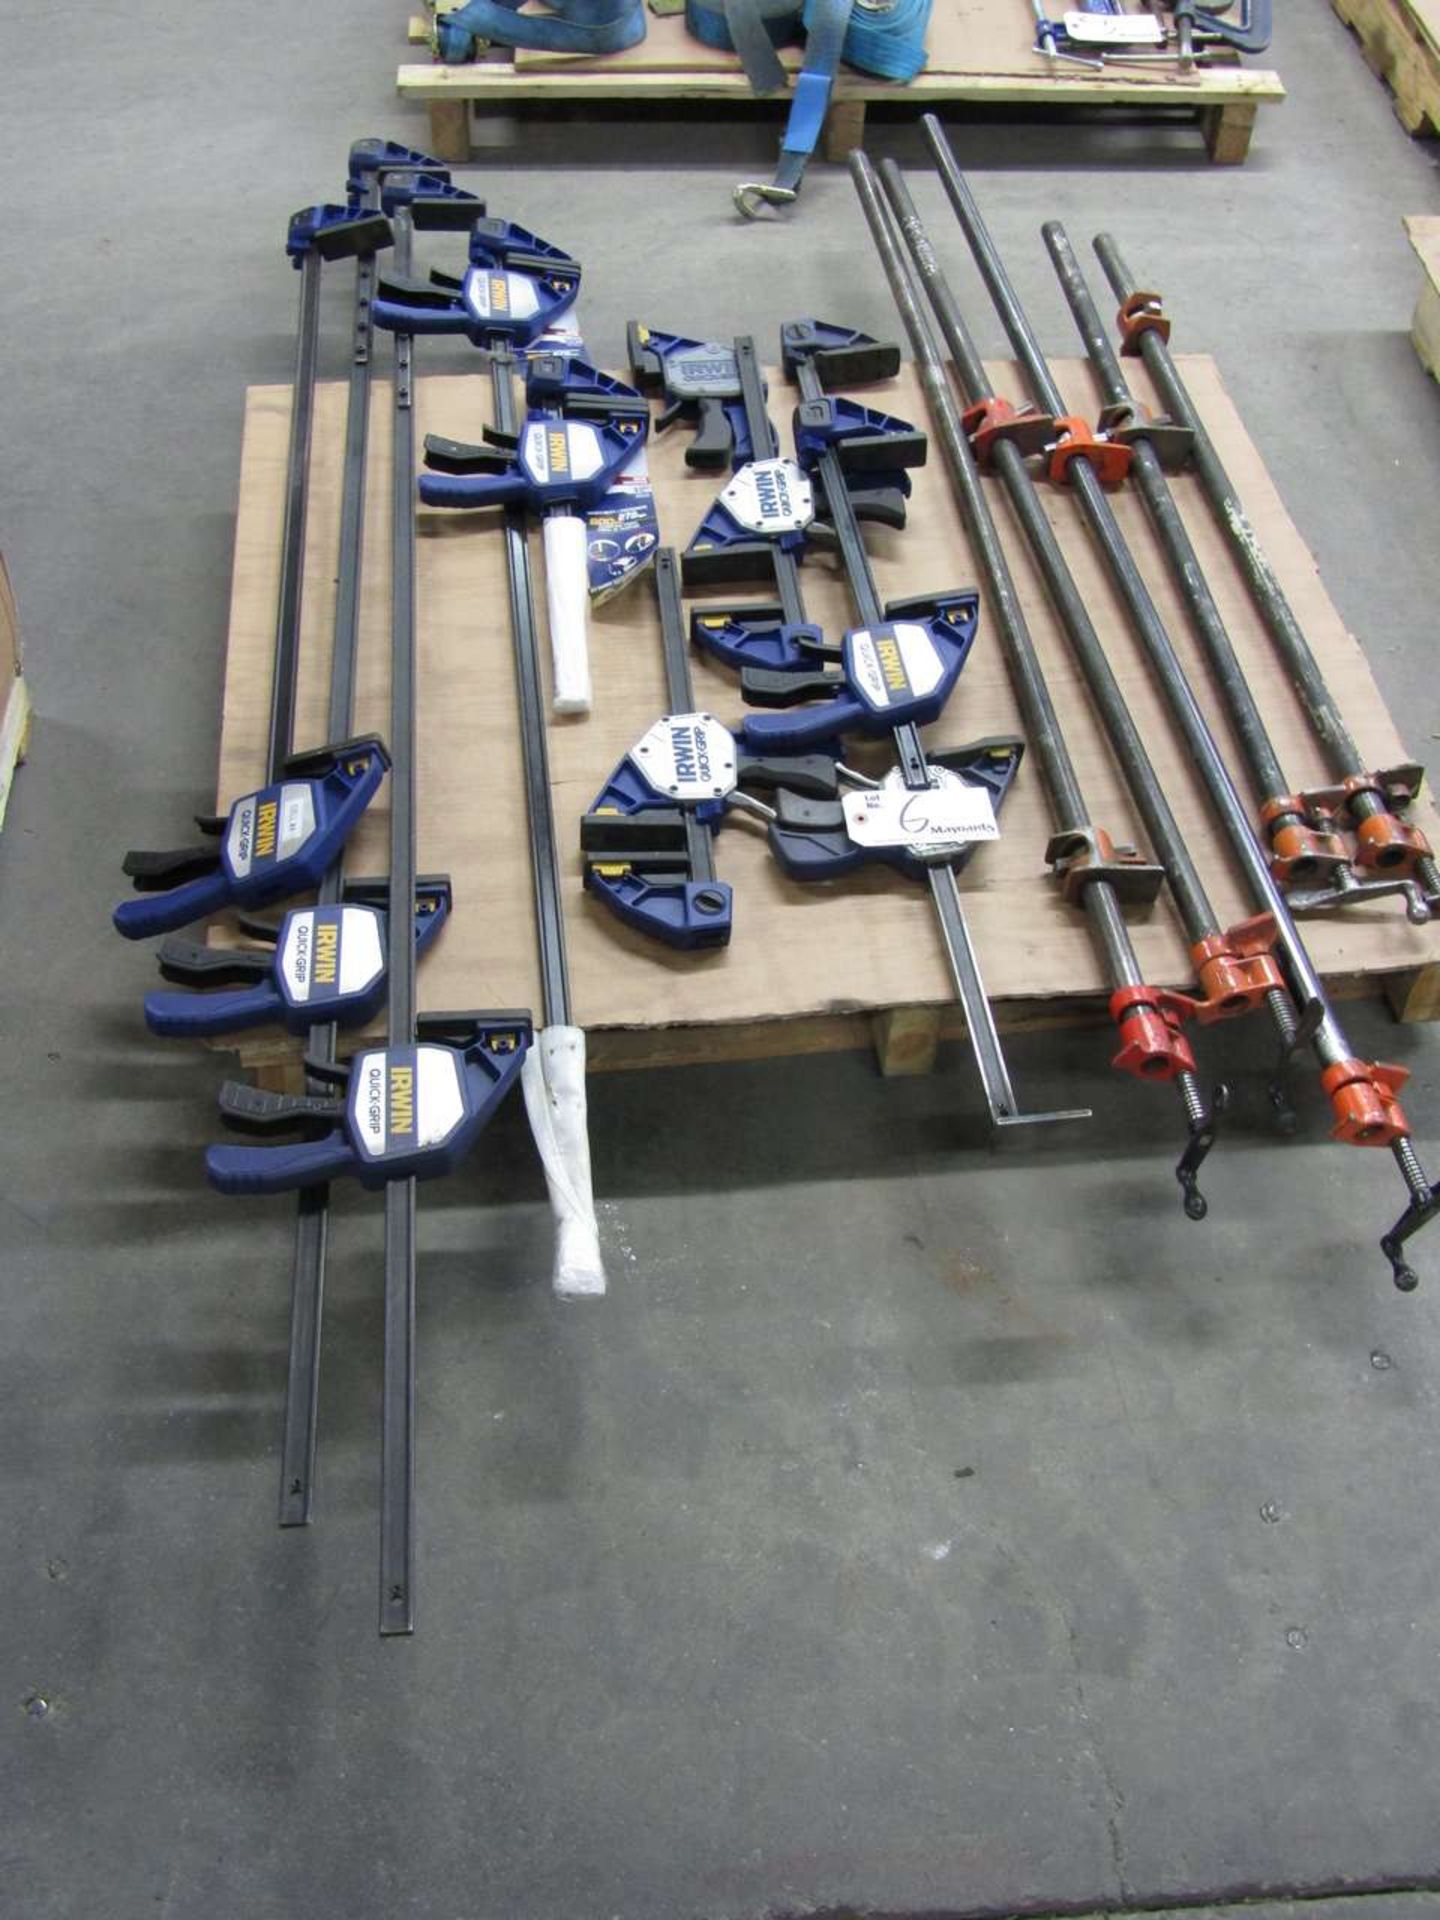 Assortment of Ratchetting bar clamps